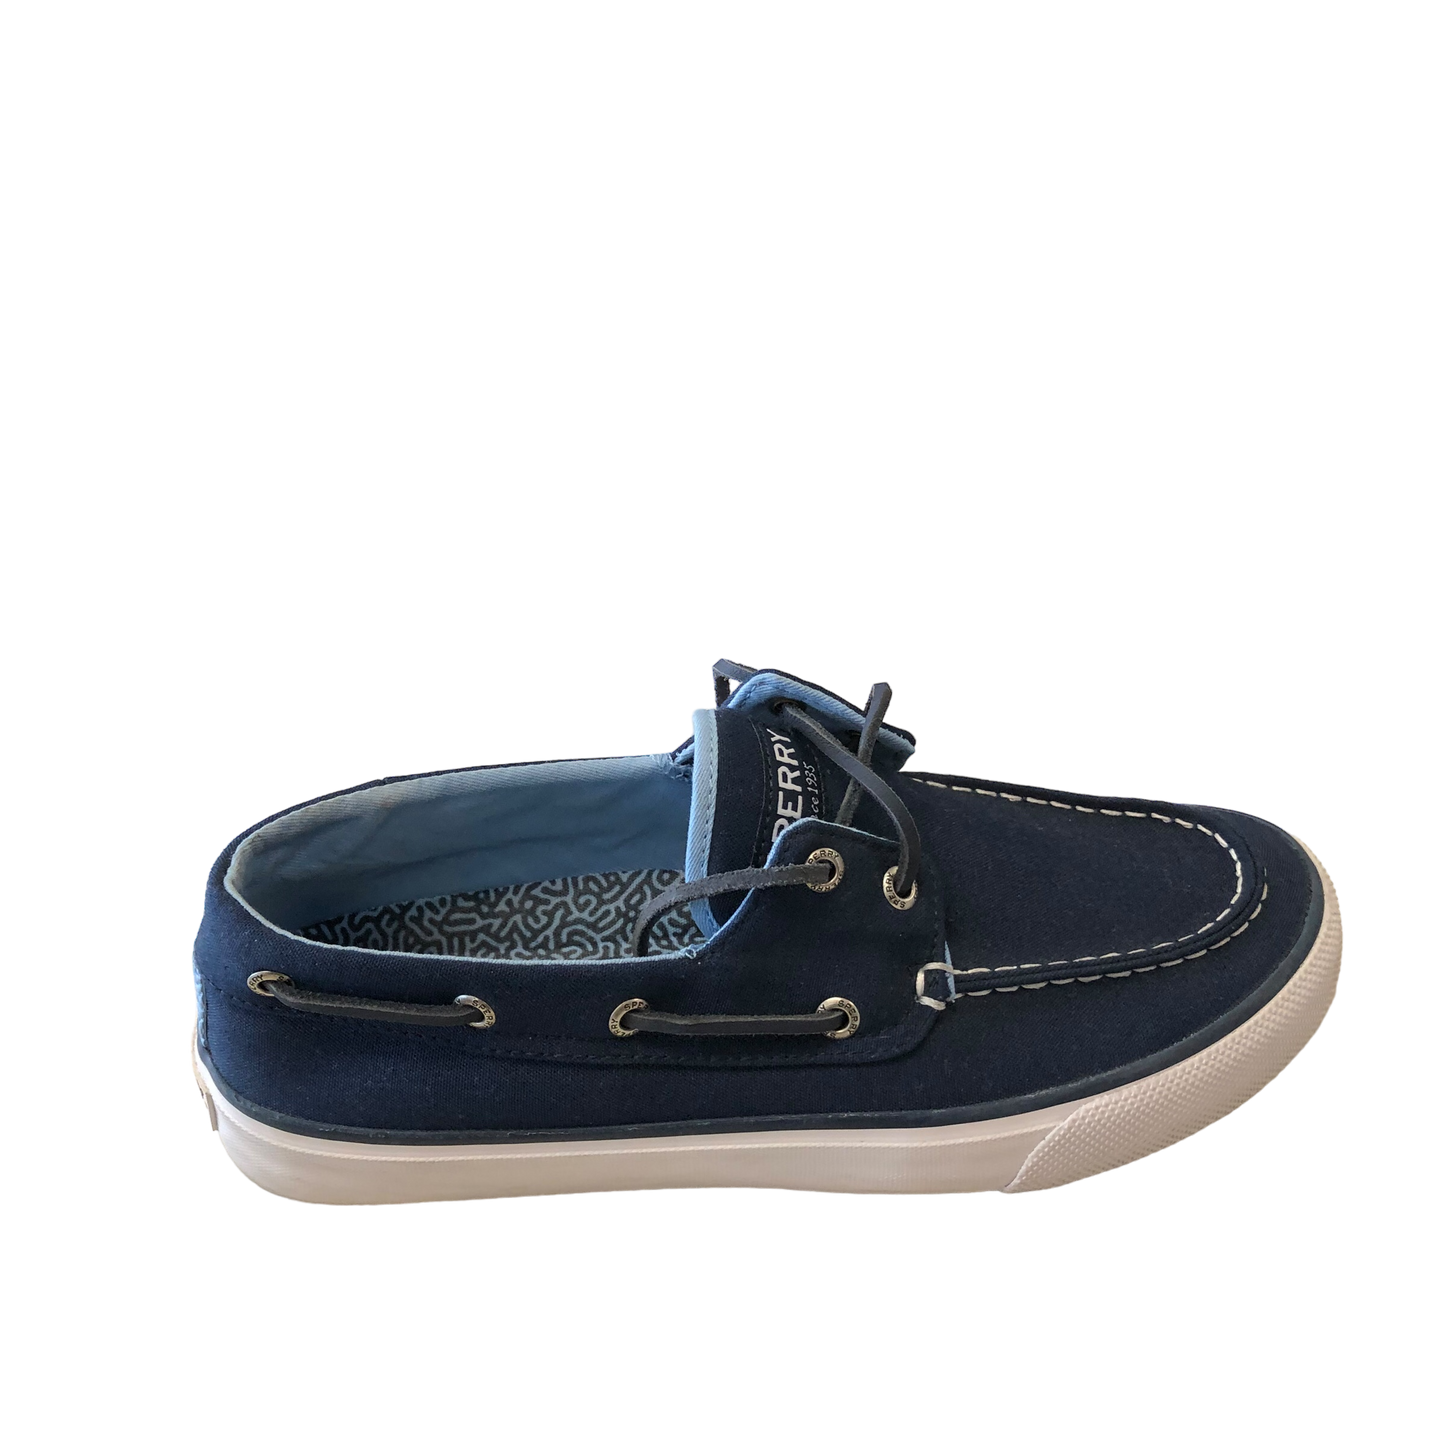 Blue Shoes Flats Sperry, Size 8